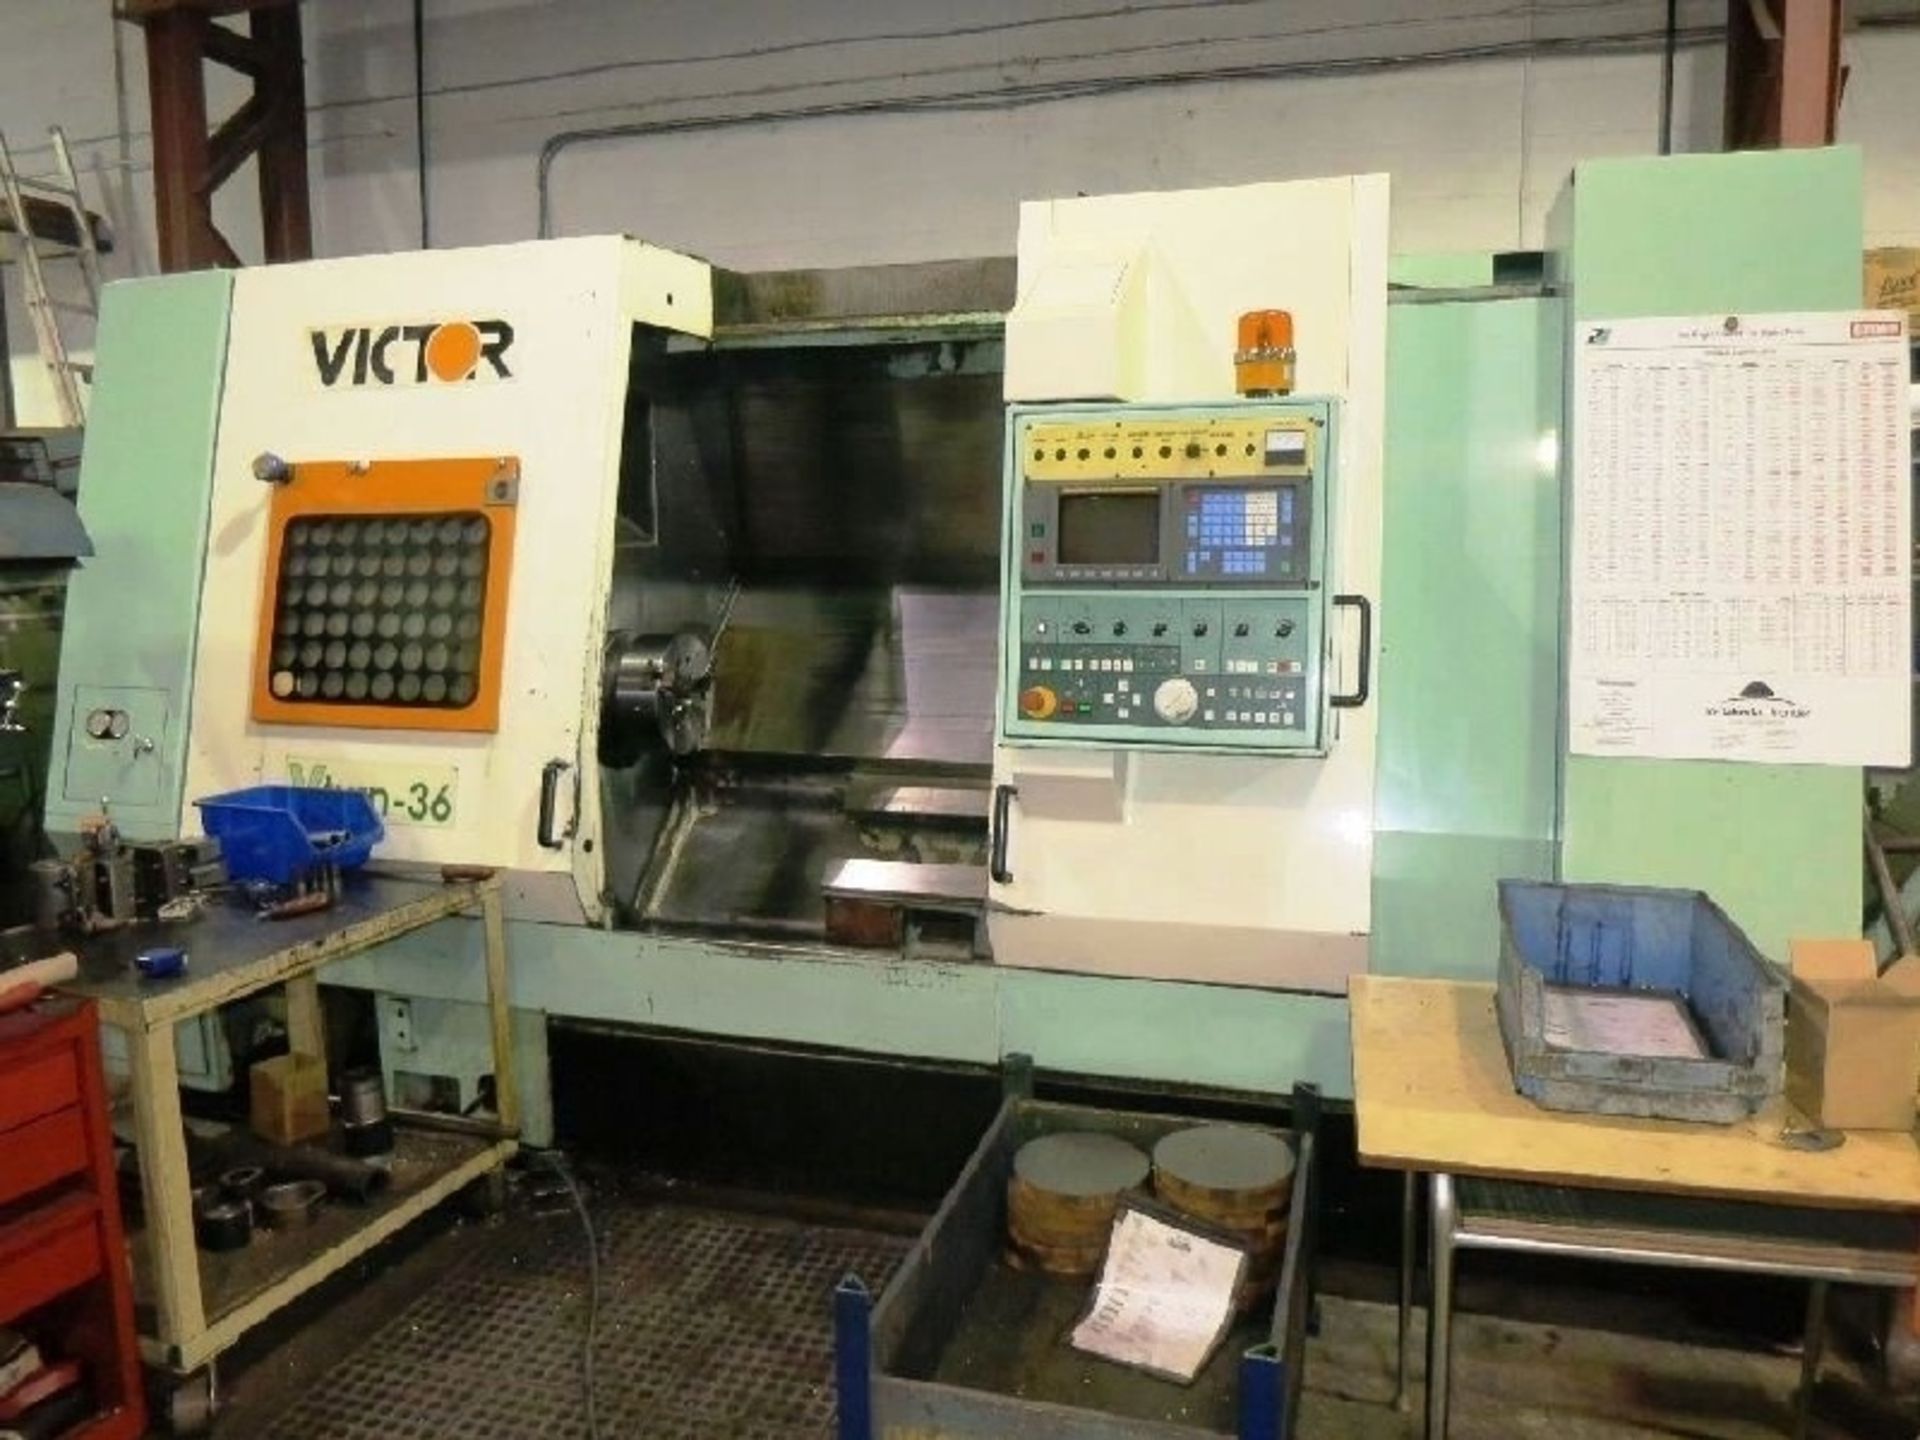 21.65" X 42.1" VICTOR (FORTUNE) MDL VTURN-36 2-AXIS CNC TURNING CENTER LATHE, S/N MD-1185, NEW